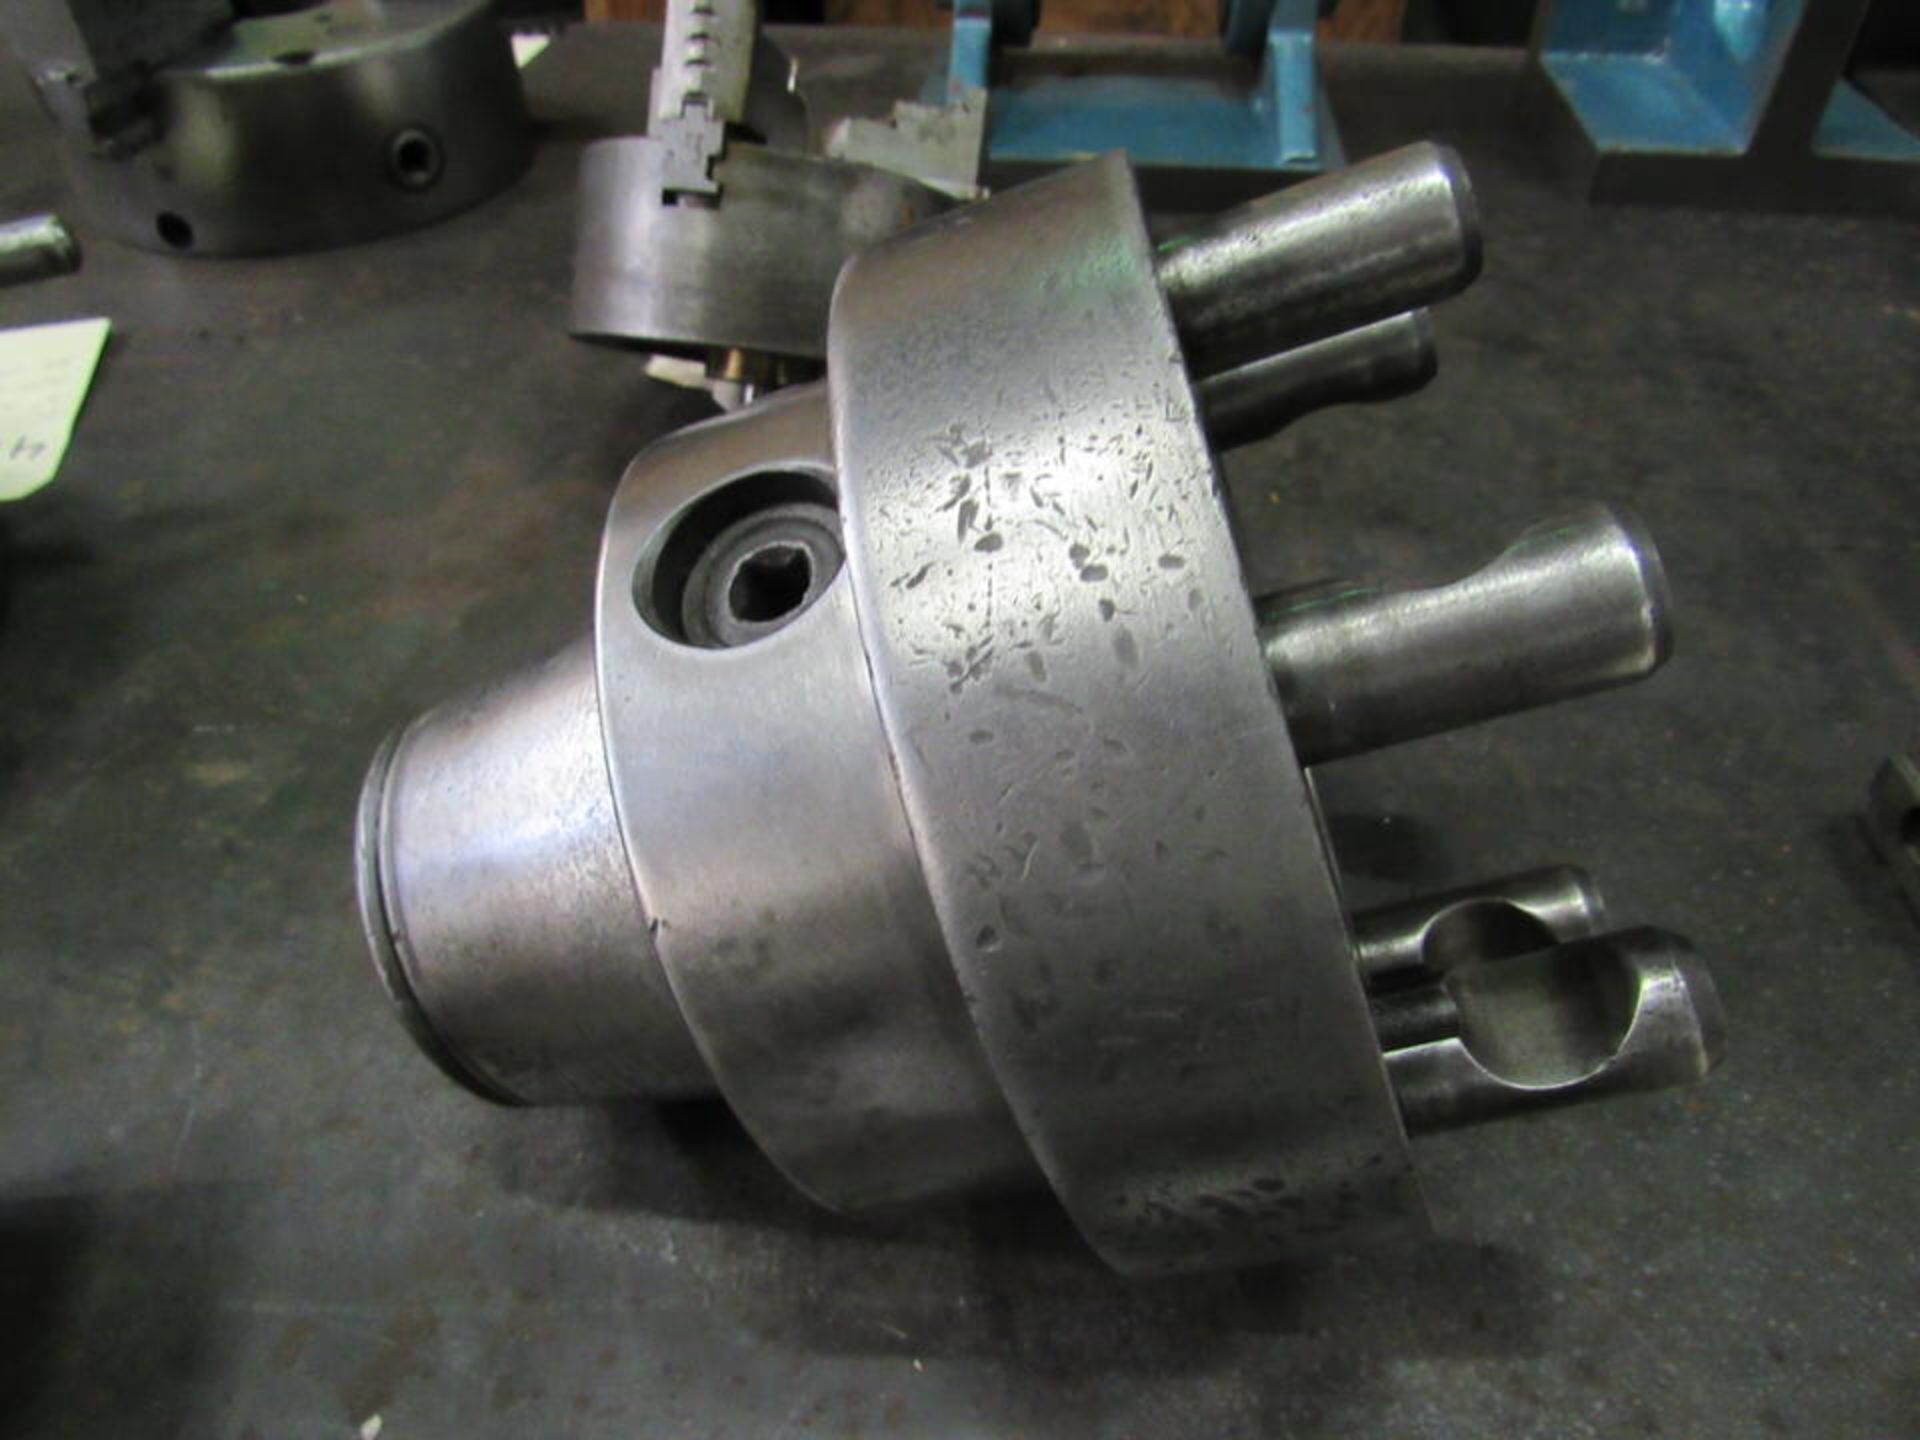 7" Collet Chuck, 1/2" collet, camlock back, S/N NA (LOCATION: 3603 Melva Street, Houston TX 77020) - Image 4 of 4